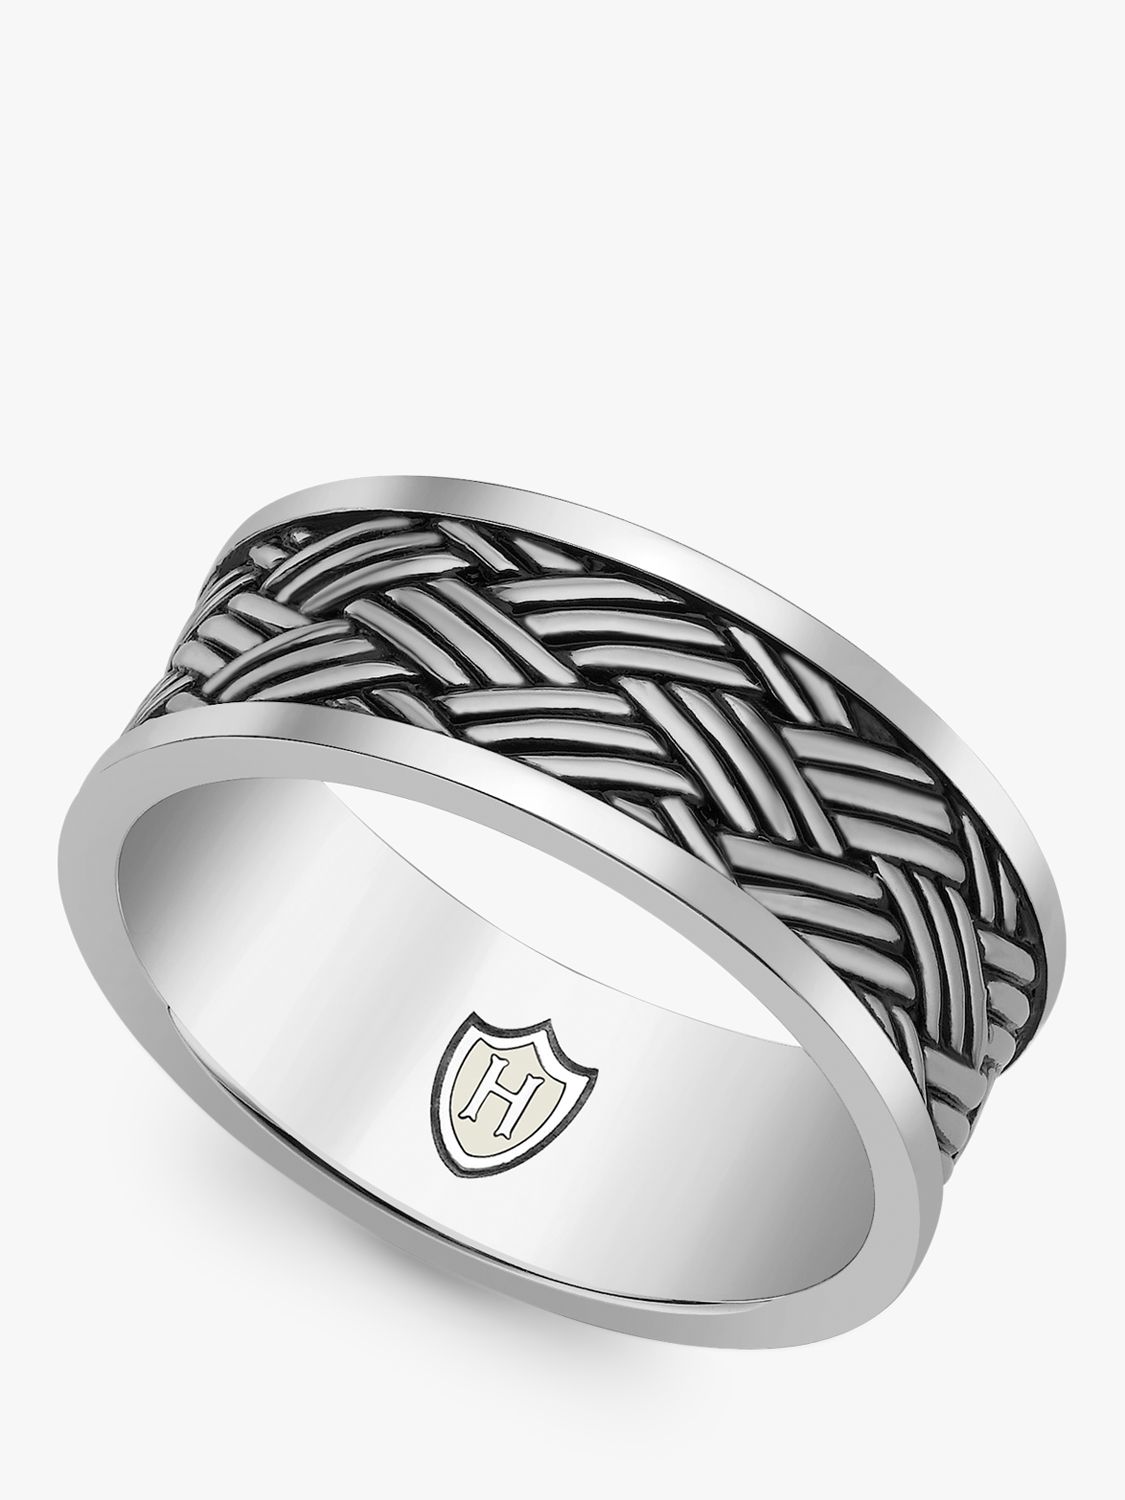 Hoxton London Men's Bamboo Oxidised Ring, Silver, R½